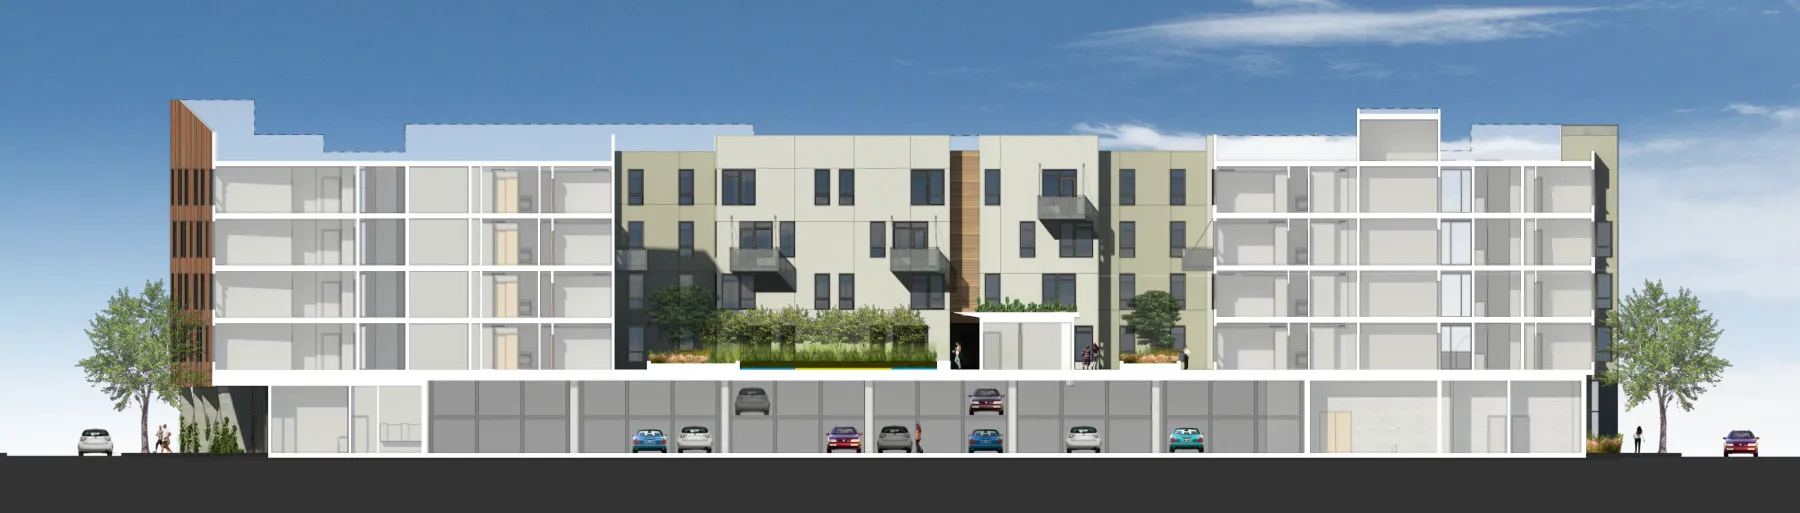 Rendered street view of Five88 in San Francisco from the north south.